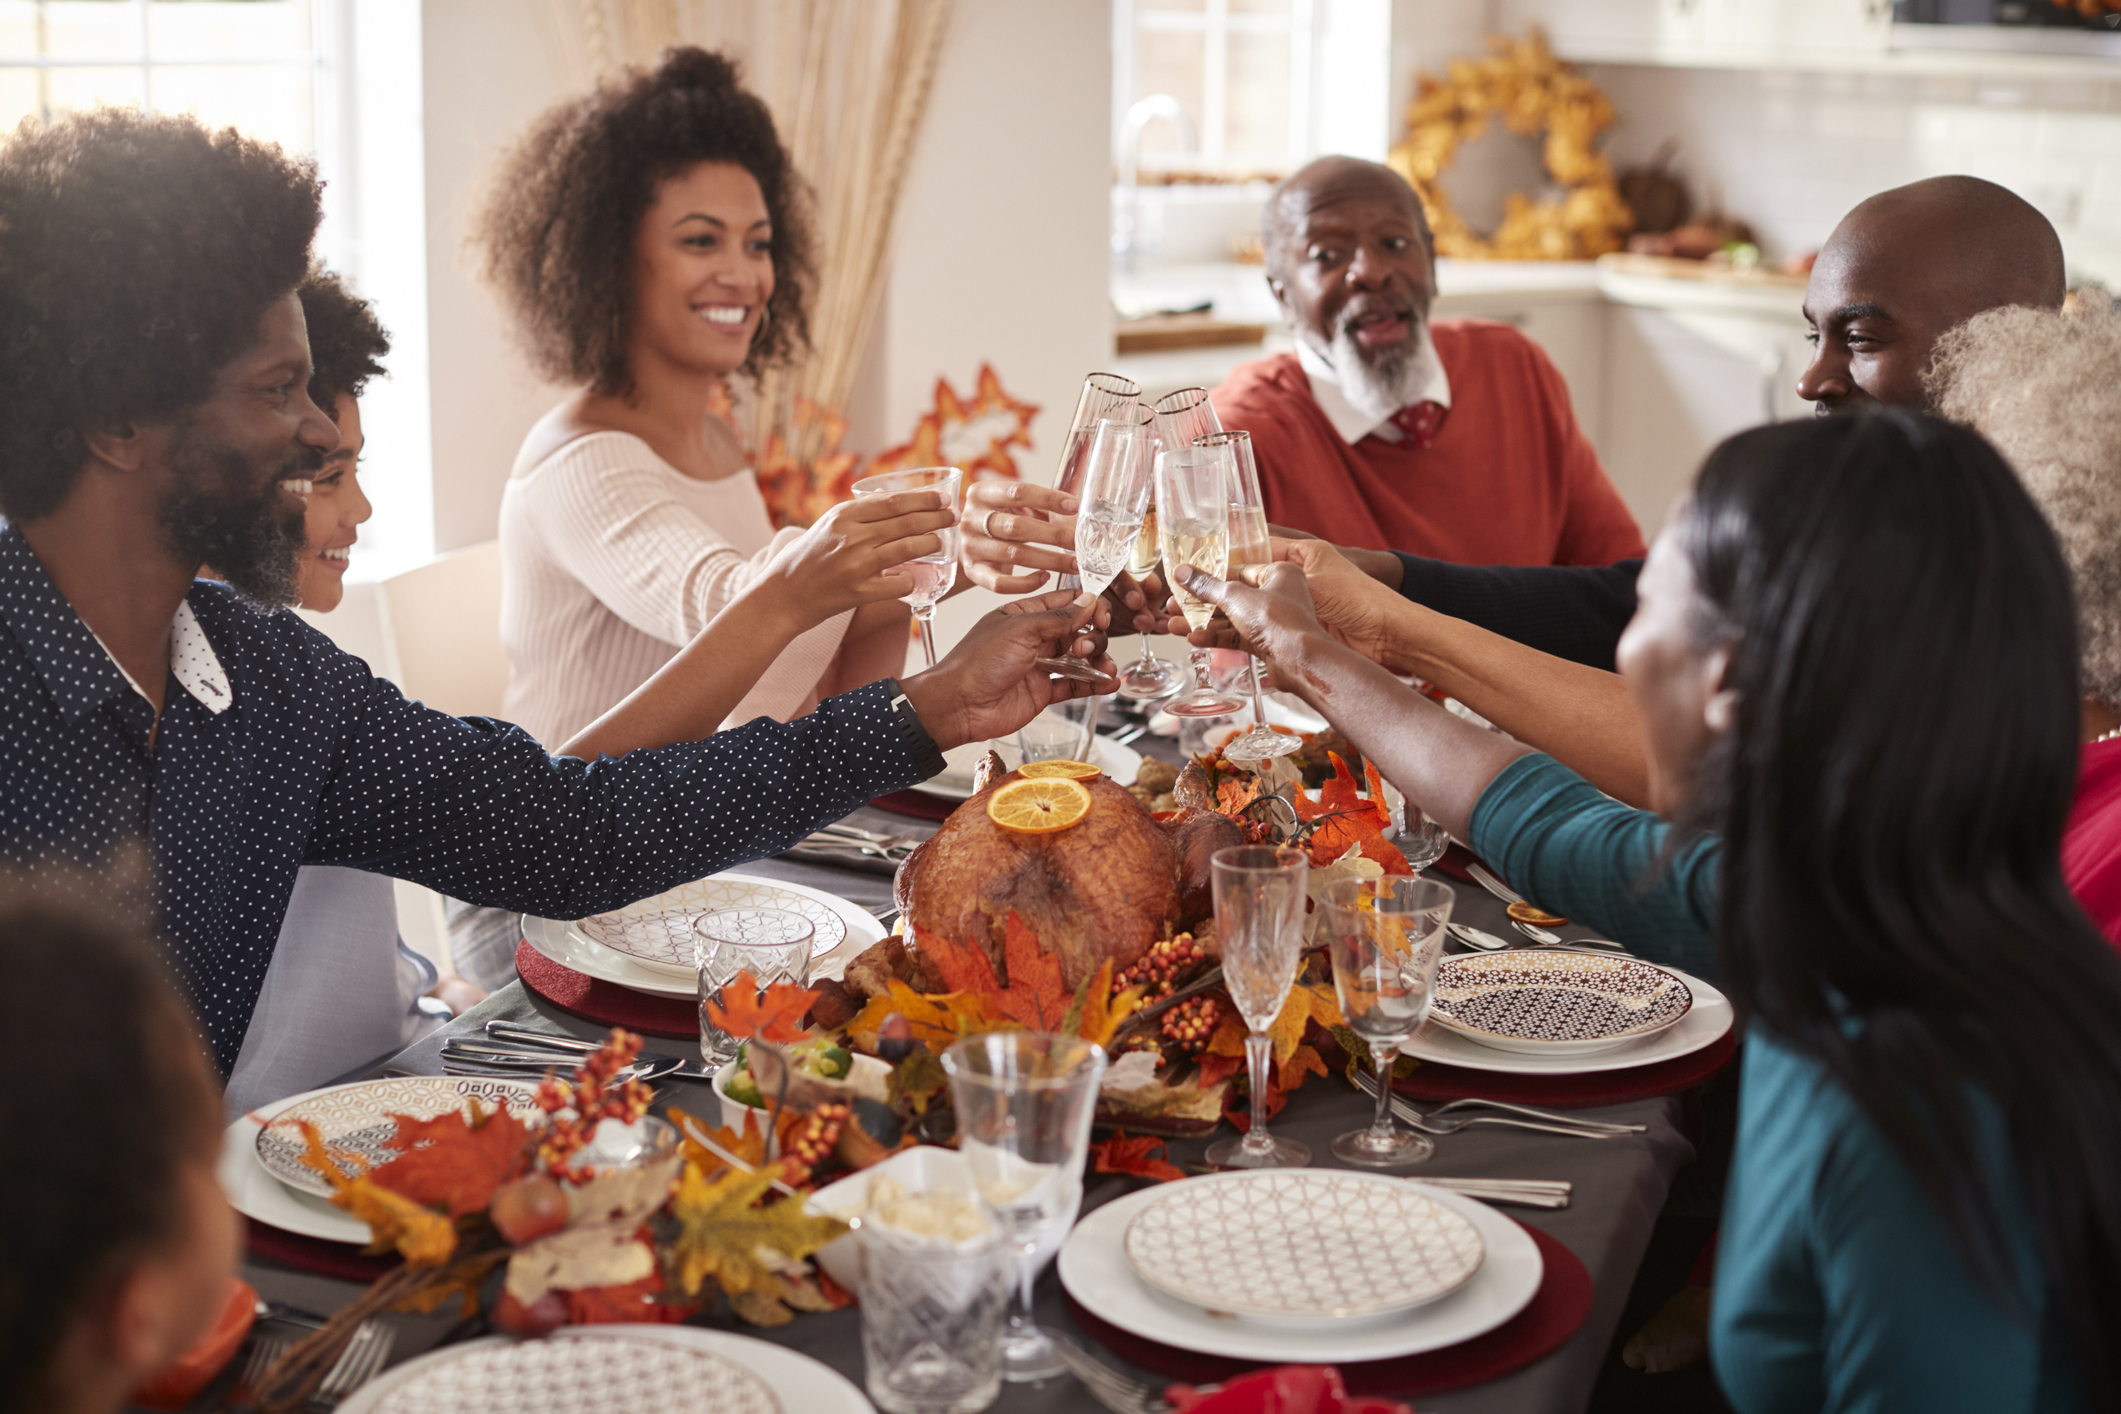 Host Your First Thanksgiving Like a Pro